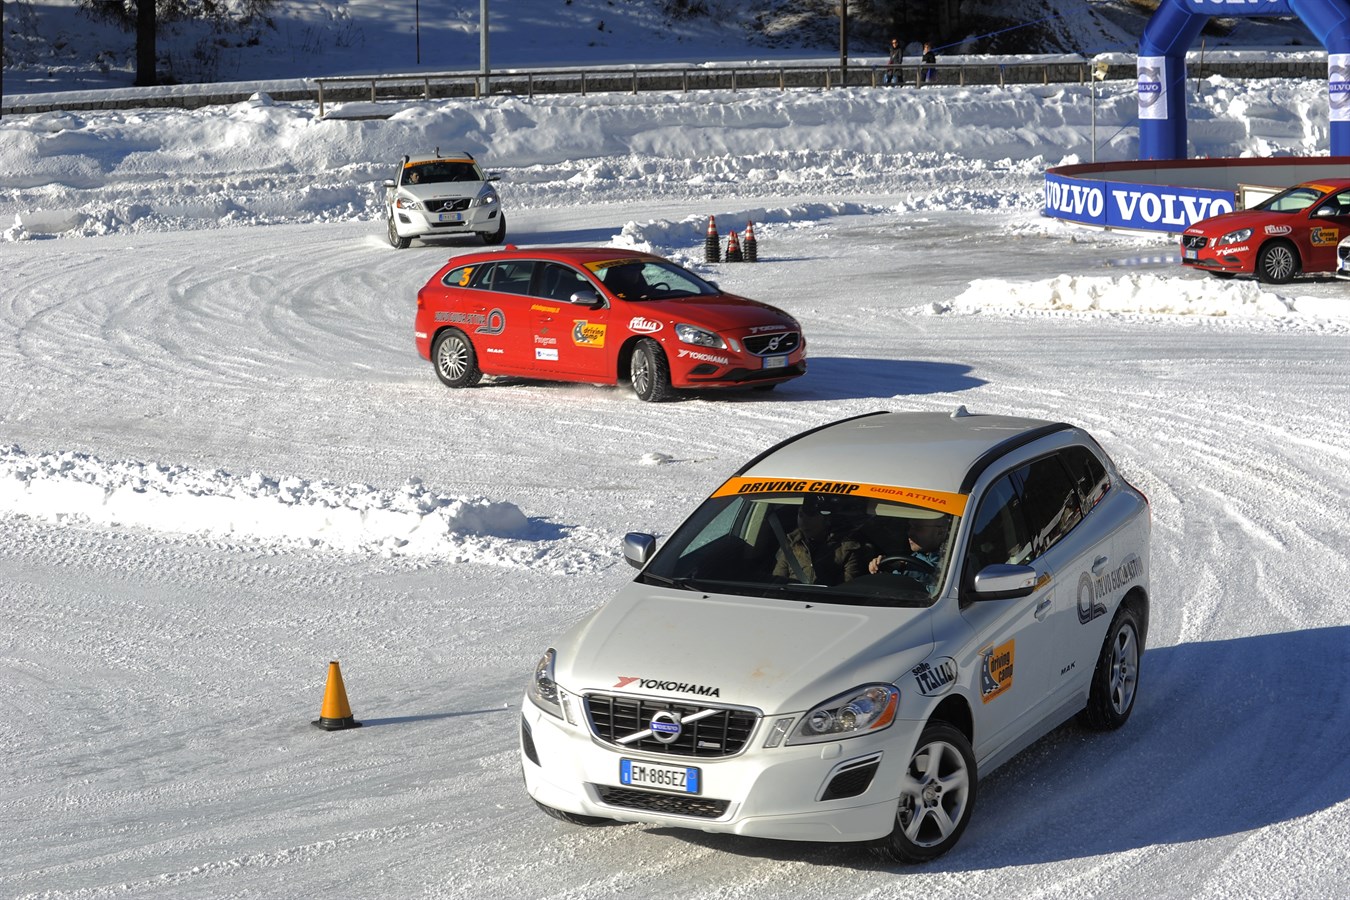 Volvo Driving Camp